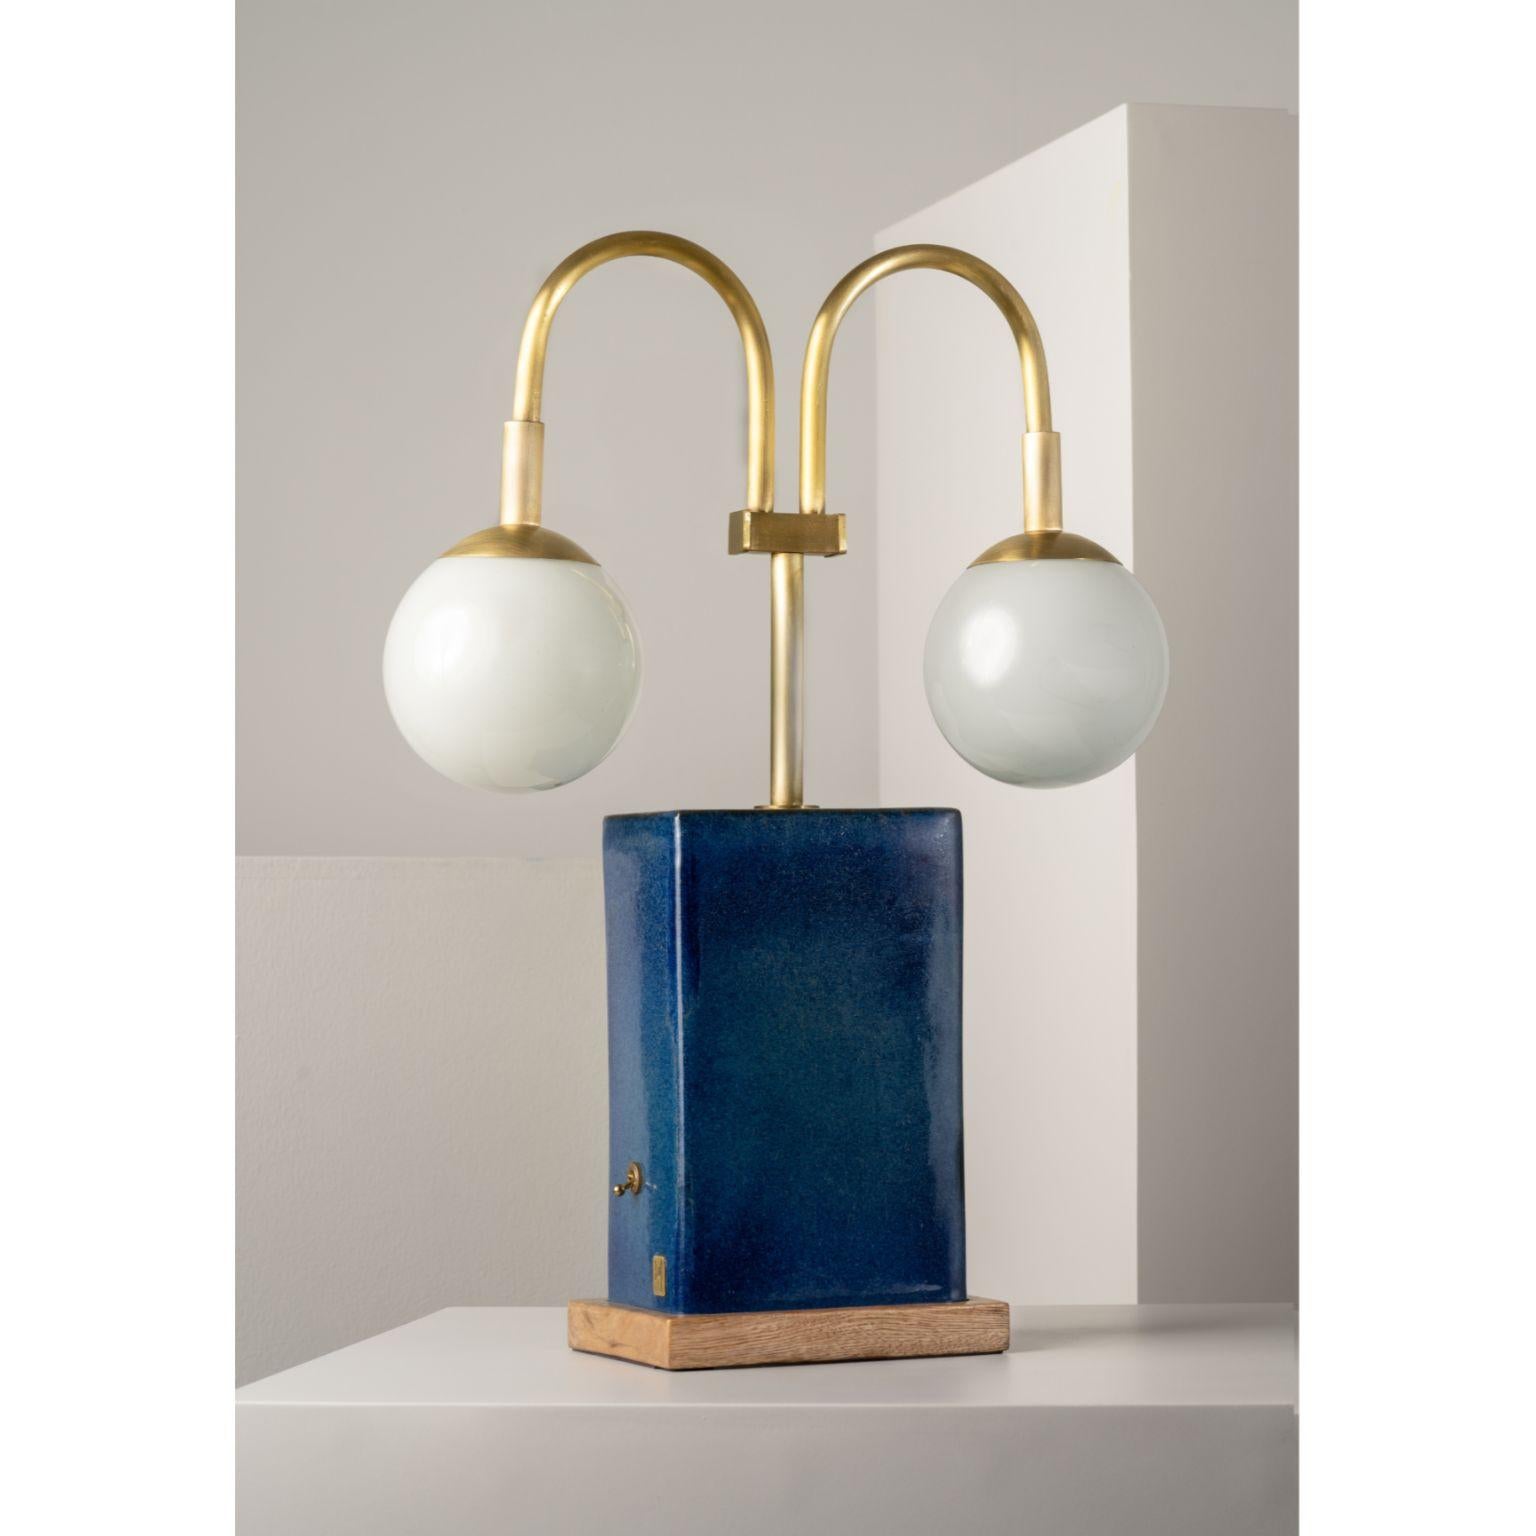 Blue Yeye Table Lamp by Isabel Moncada
Dimensions: Ø 40.5 x H 53.5 cm.
Materials: Stoneware ceramic and solid wood base, hand-forged brass and blown glass globes.

As deep as space, the indigo-blue stoneware ceramic base is coupled with double